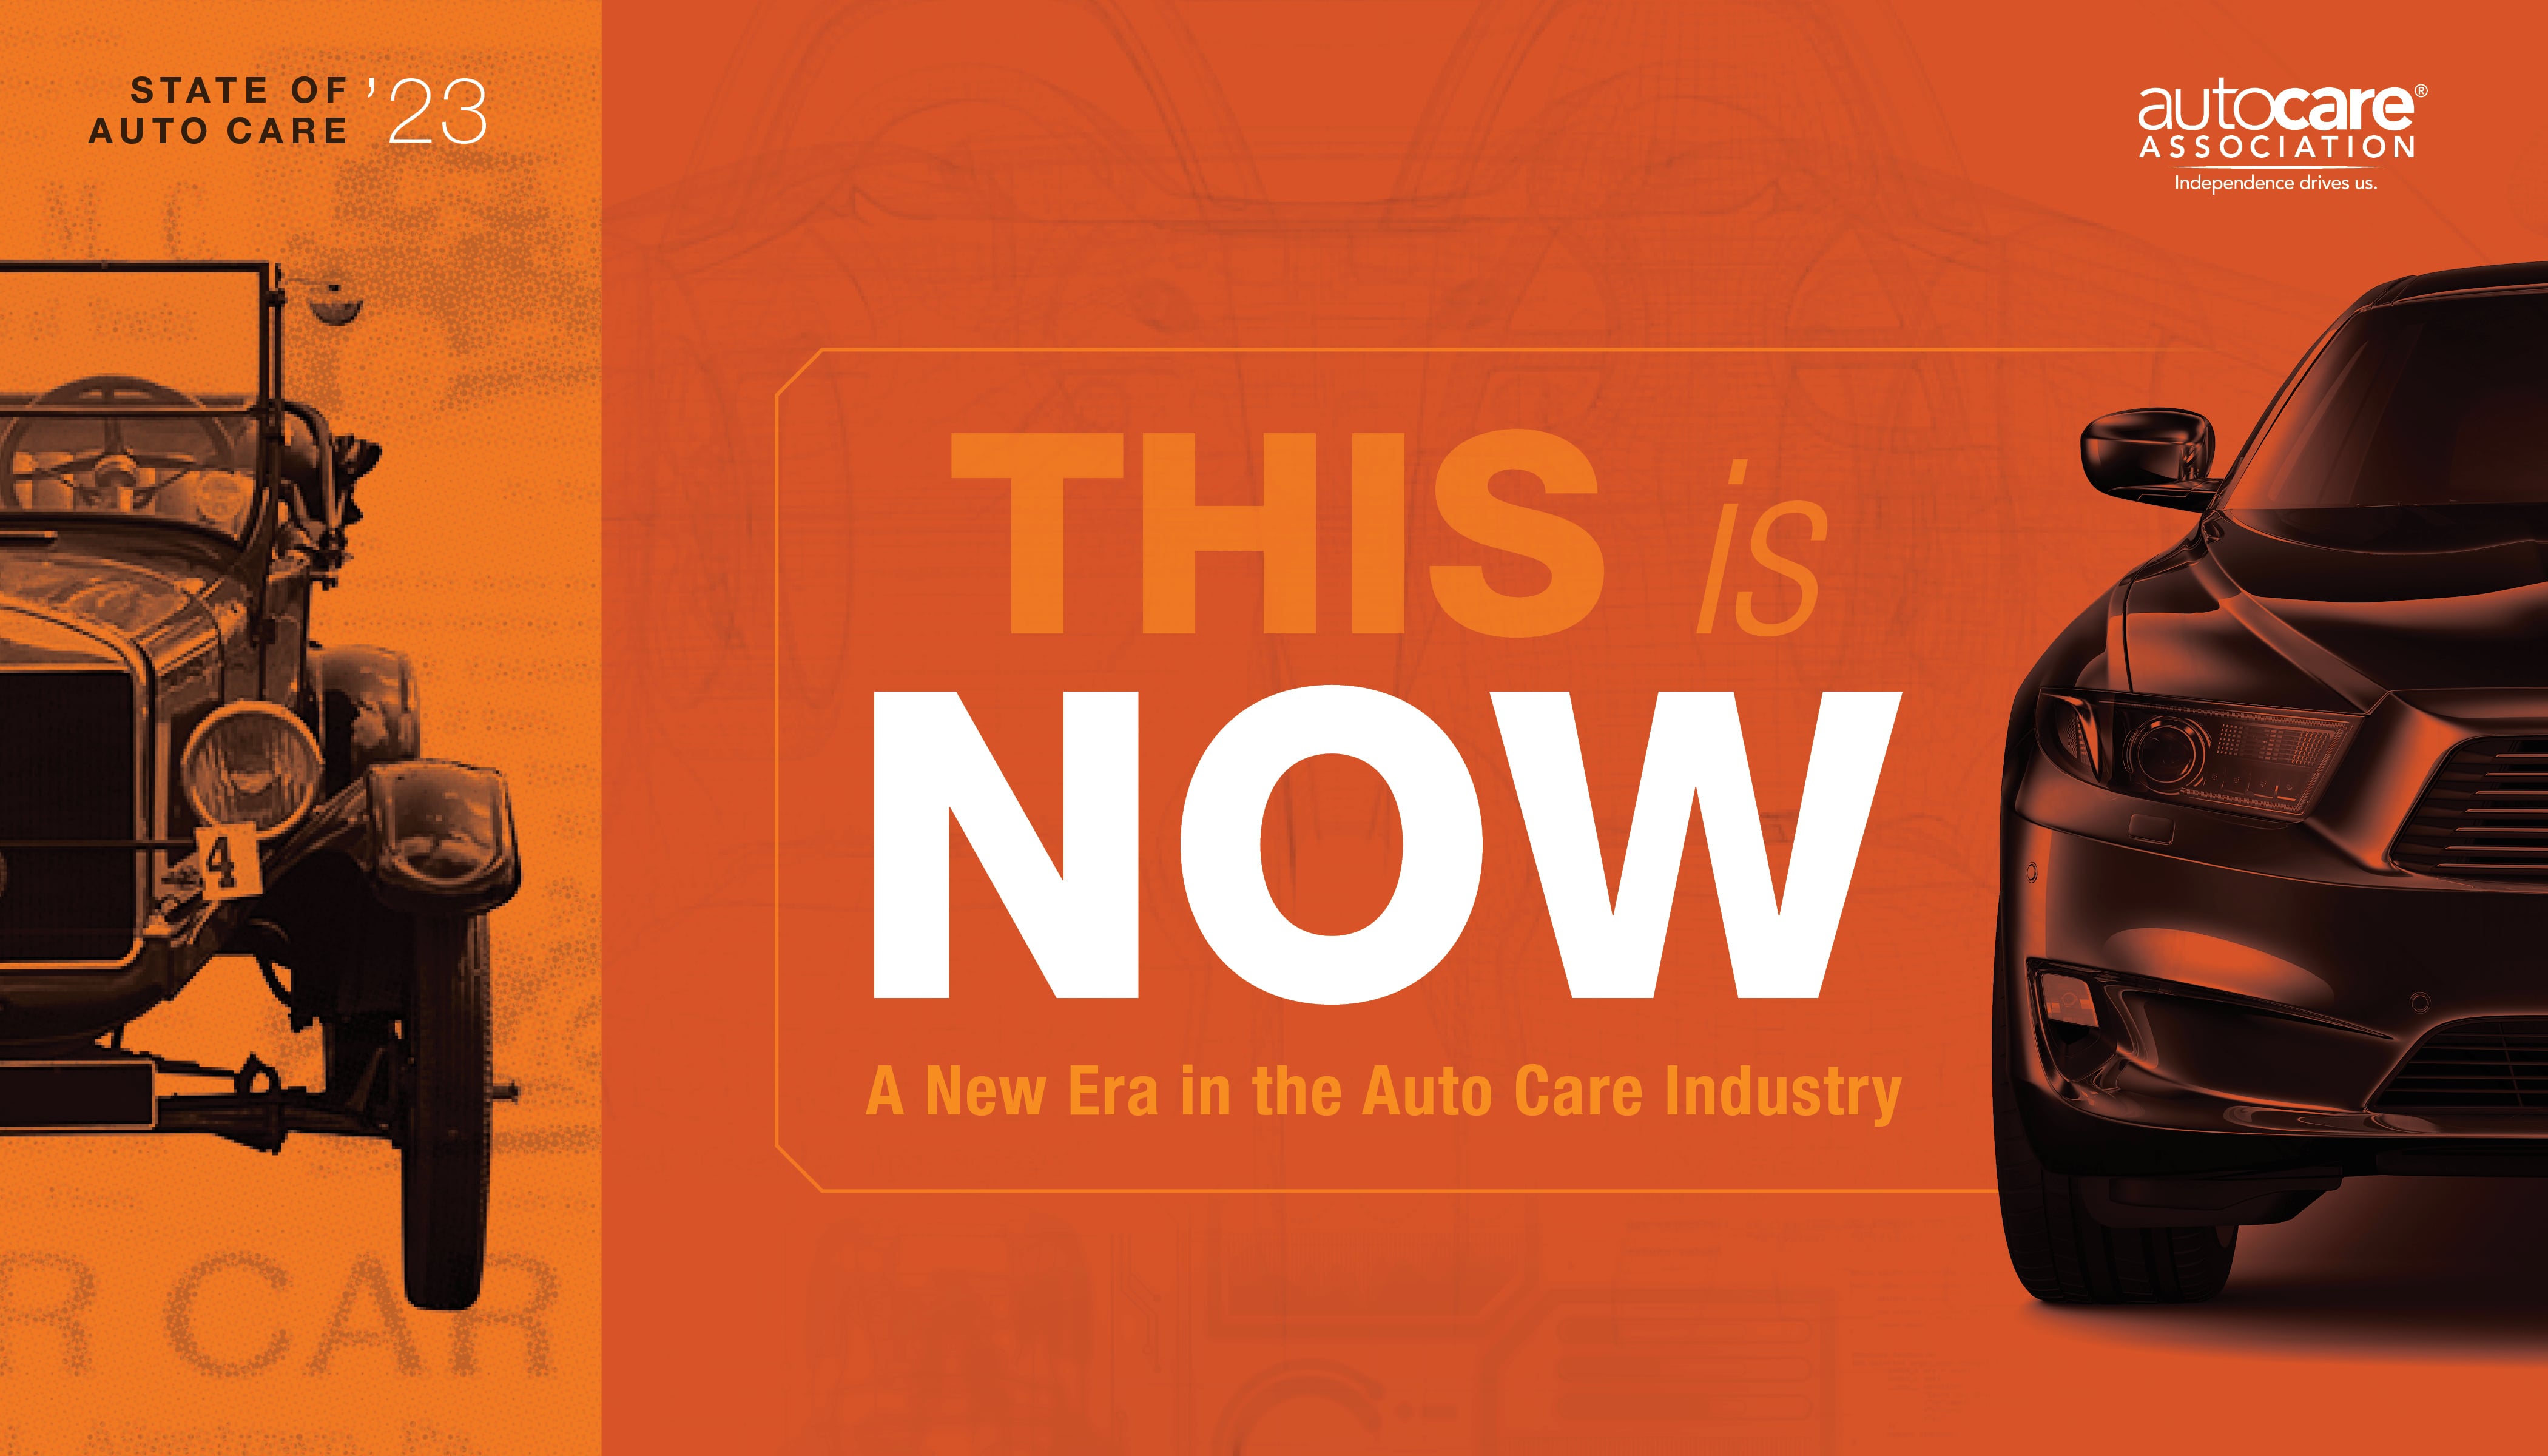 The State of Auto Care 2022